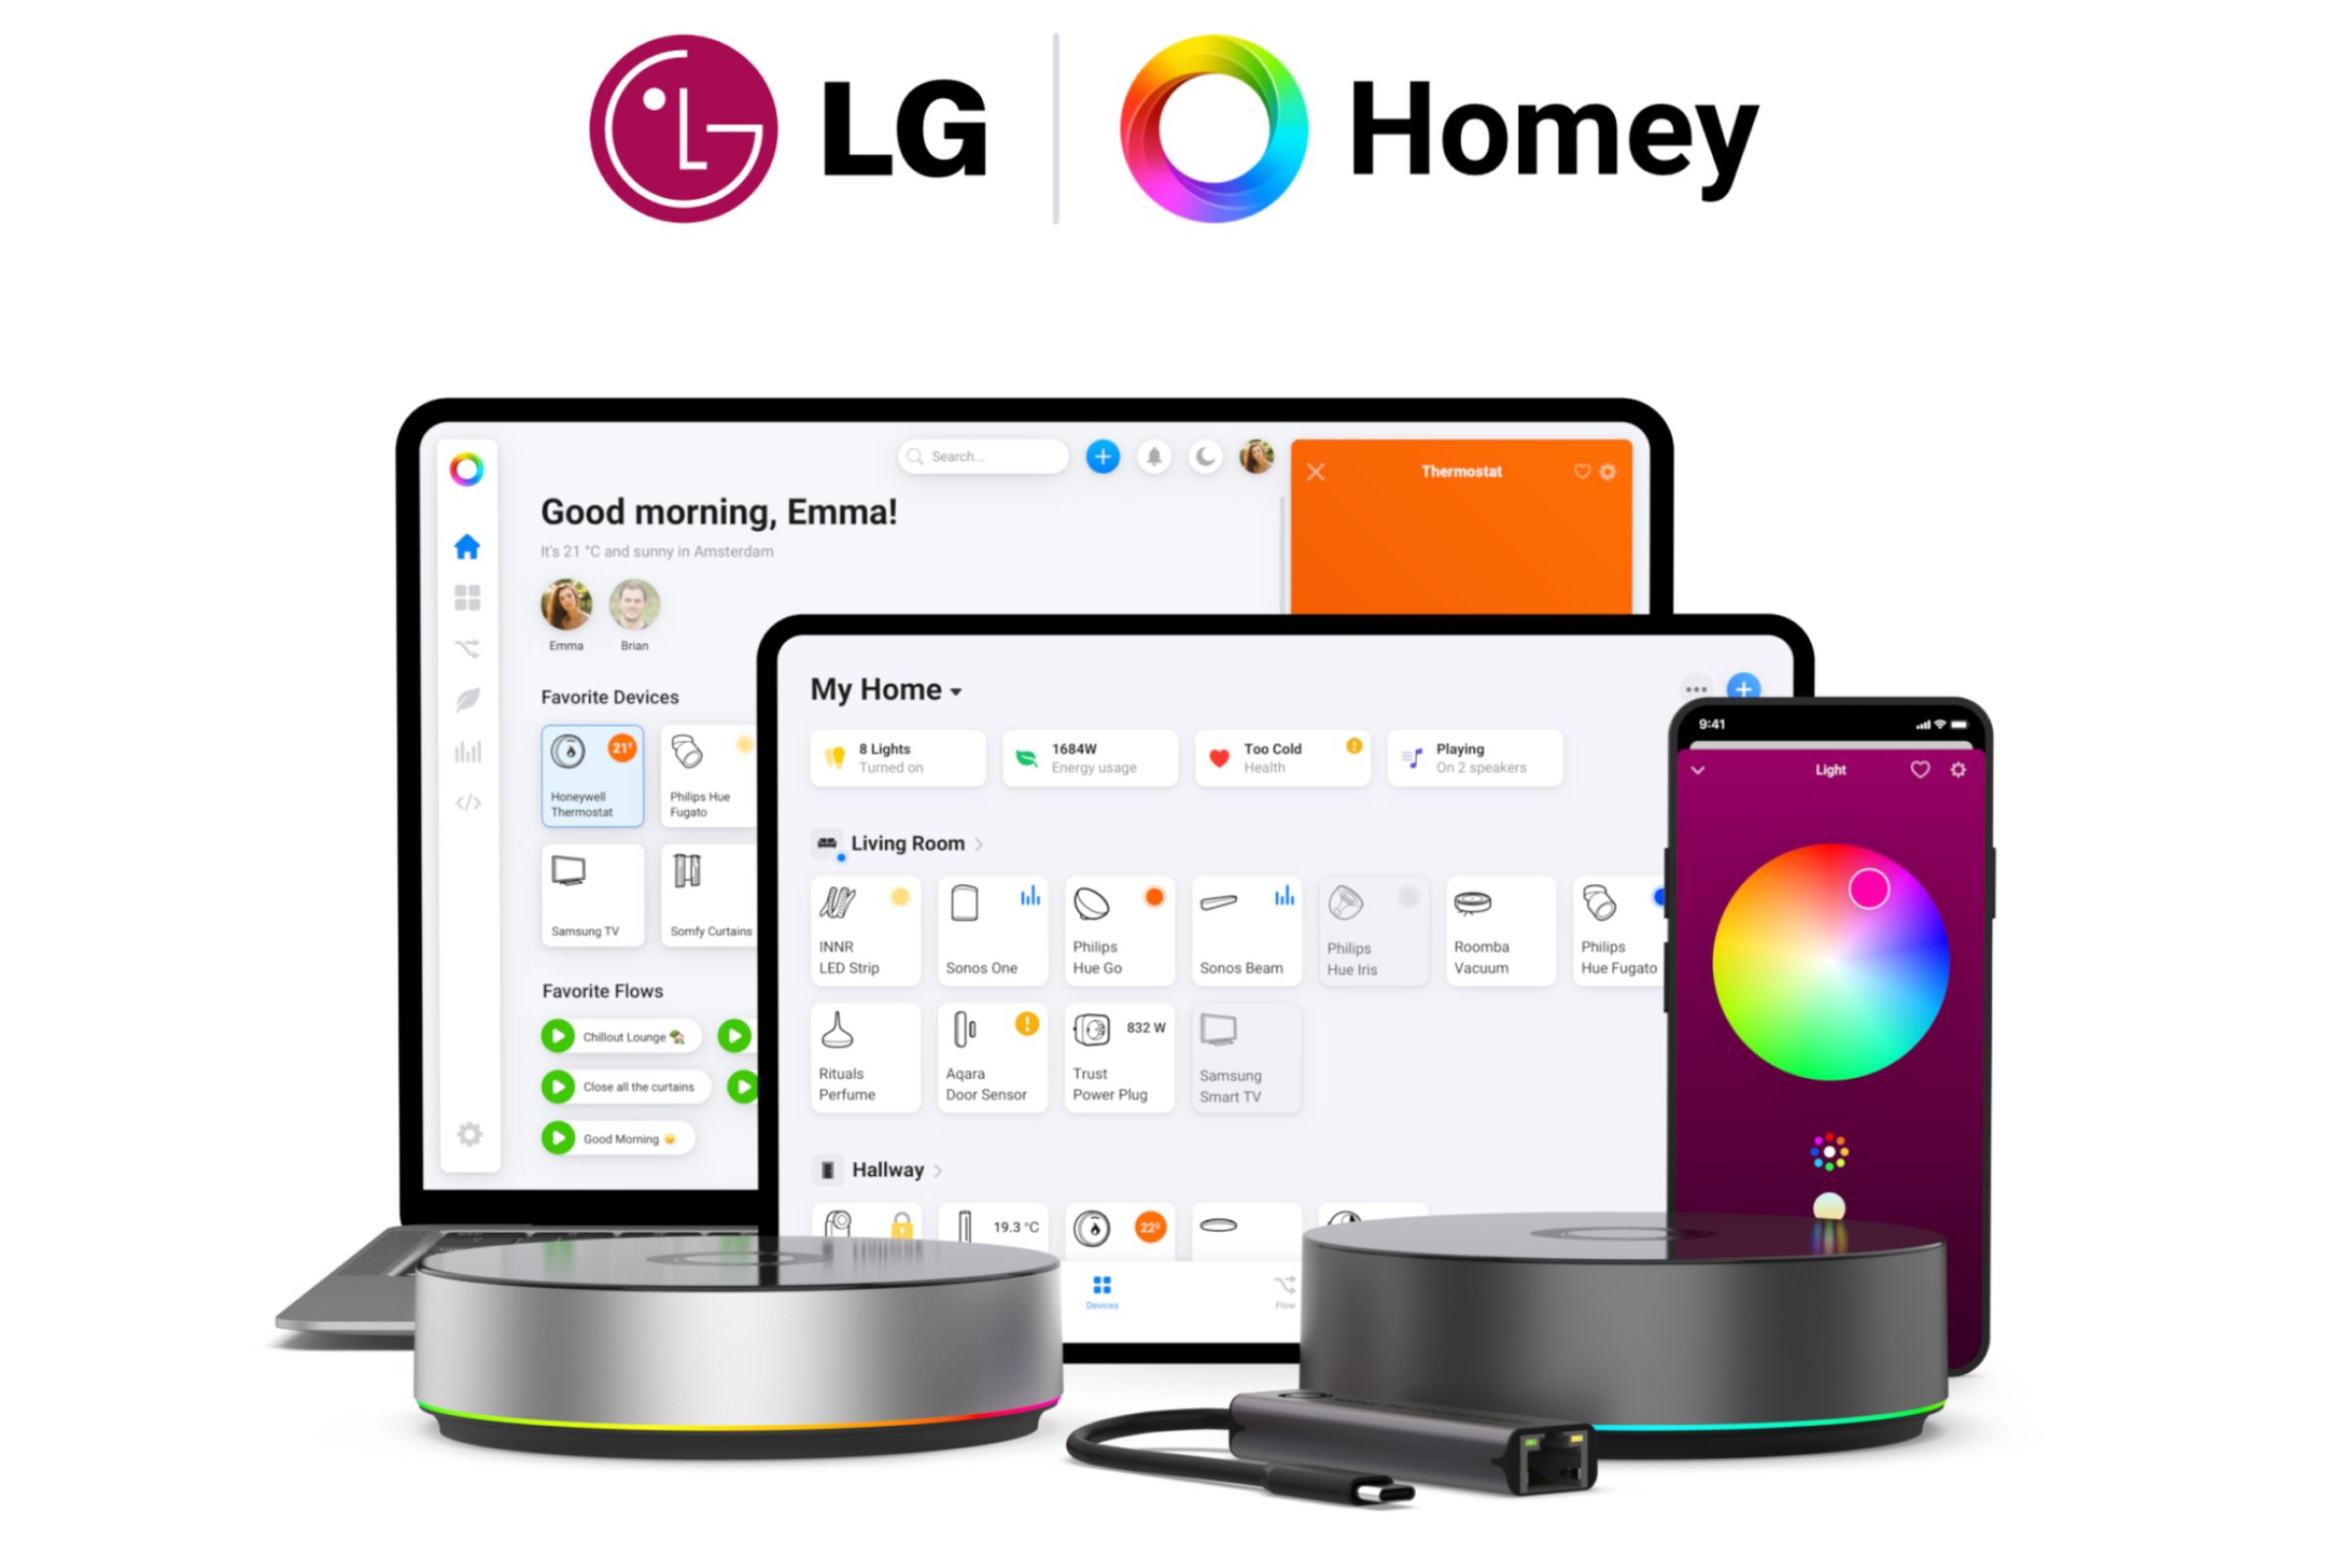 A selection of Homey smart home hubs and devices alongside the app interfaces used to control them.